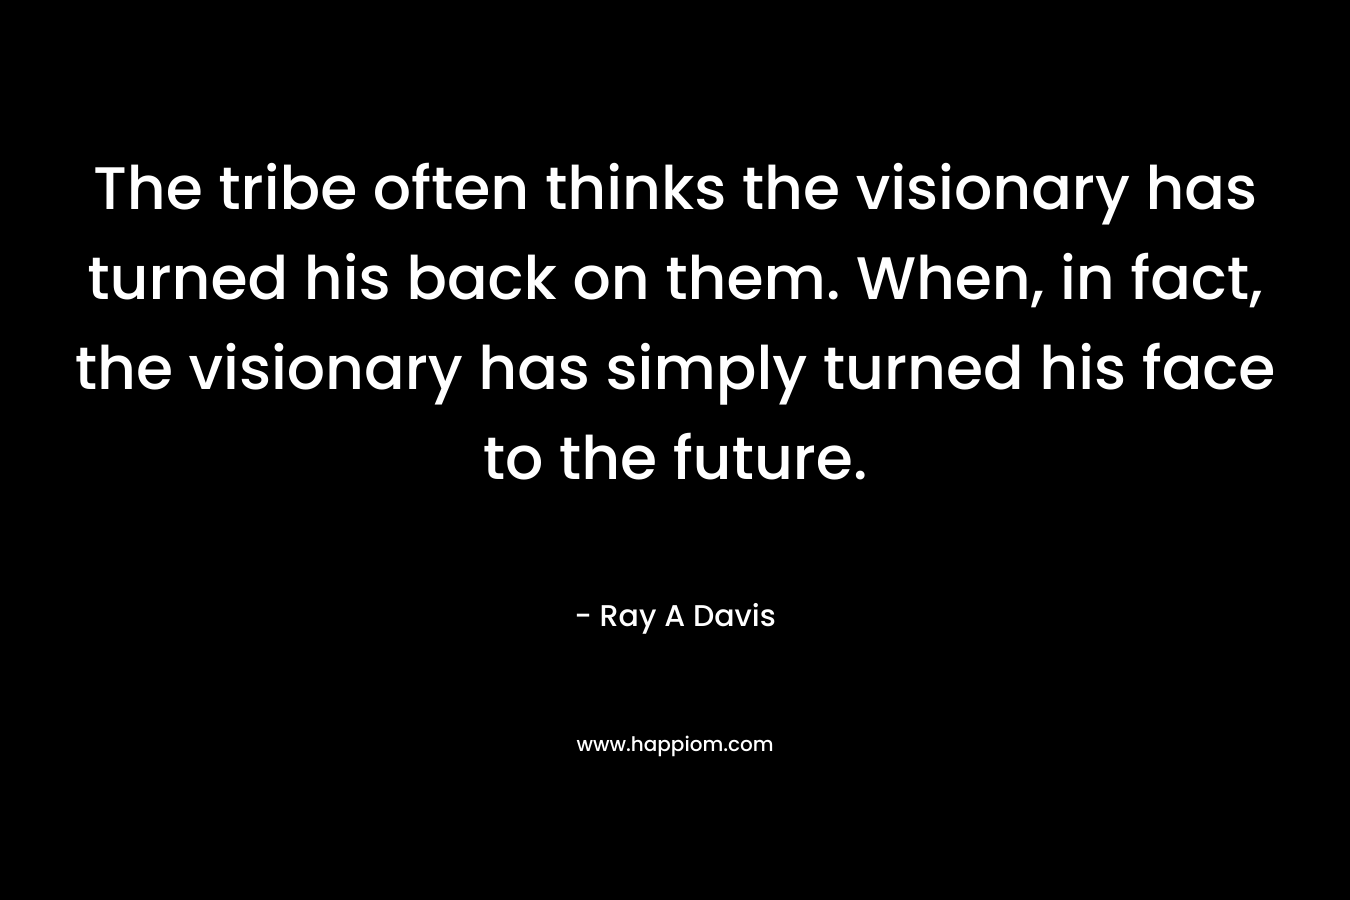 The tribe often thinks the visionary has turned his back on them. When, in fact, the visionary has simply turned his face to the future. – Ray A Davis